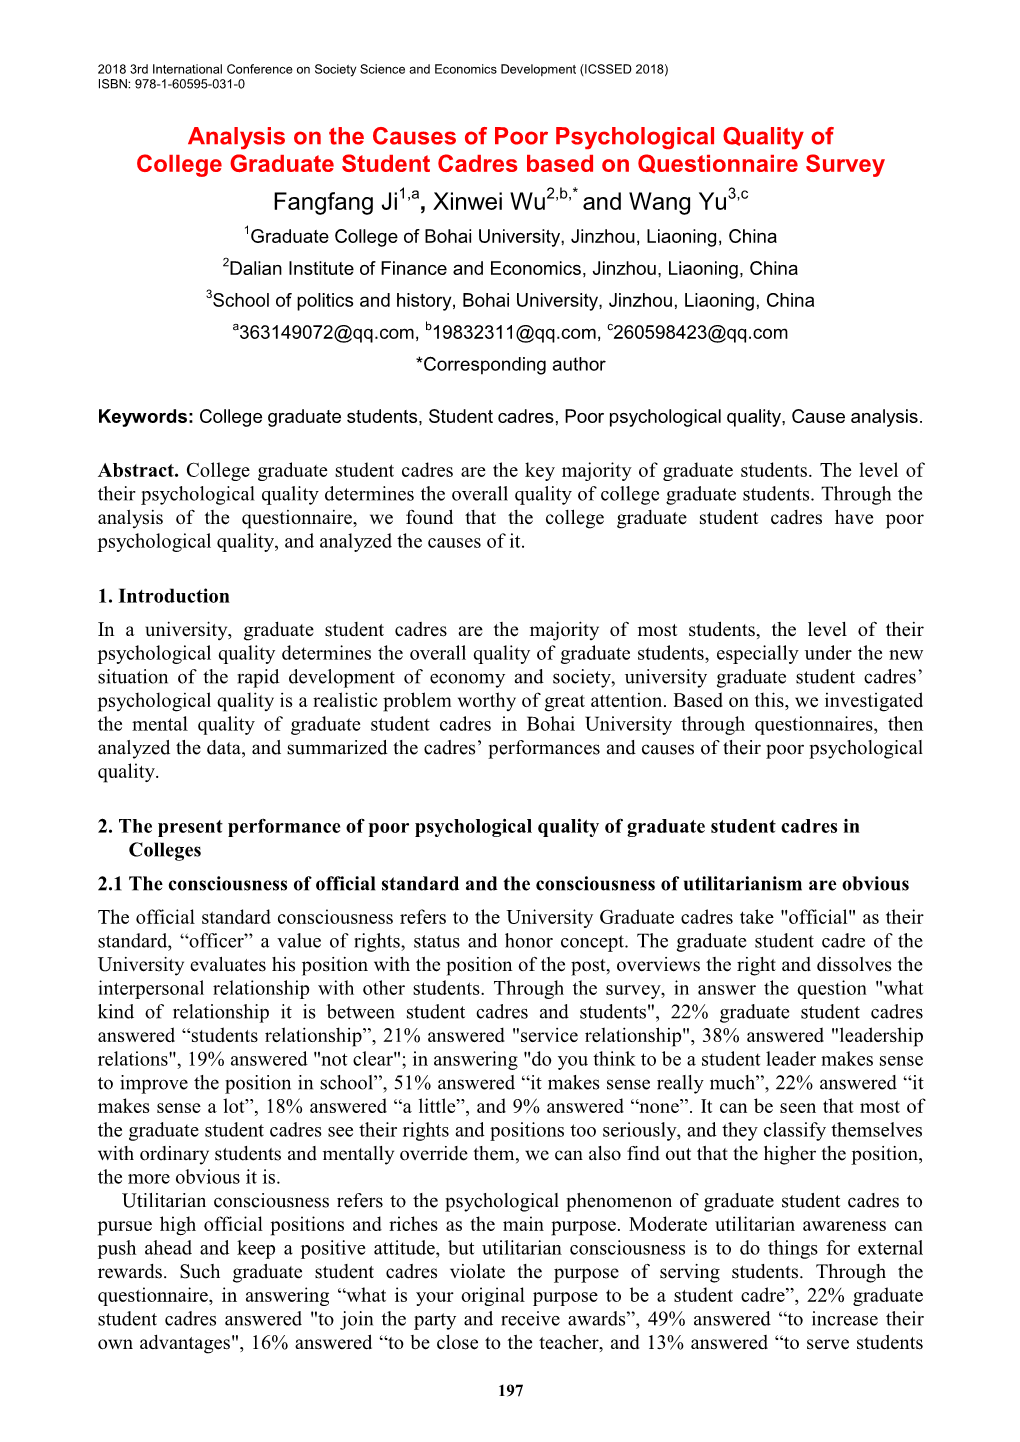 Analysis on the Causes of Poor Psychological Quality of College Graduate Student Cadres Based on Questionnaire Survey Fangfang J